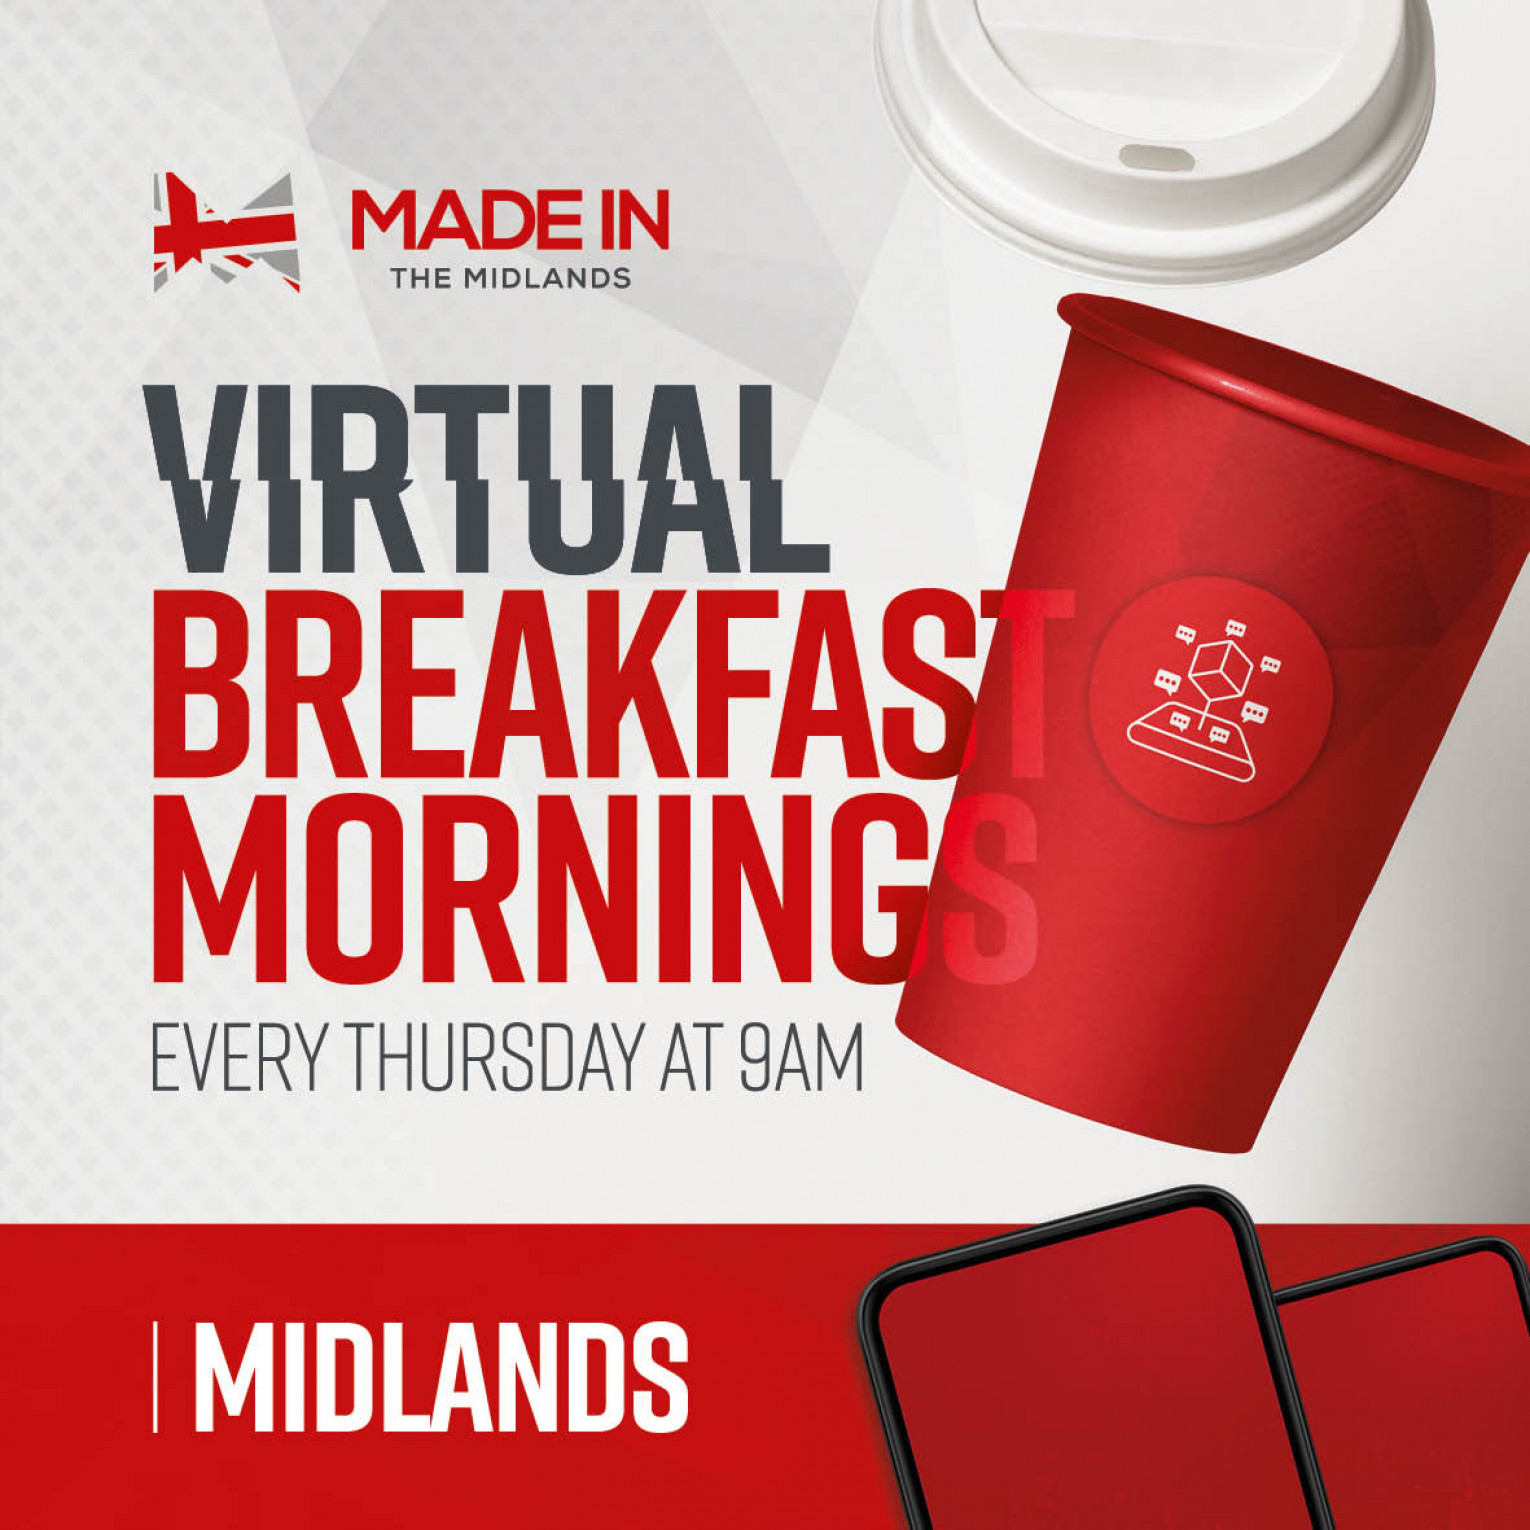 Made in the Midlands Virtual Breakfast Morning with QFS Technologies